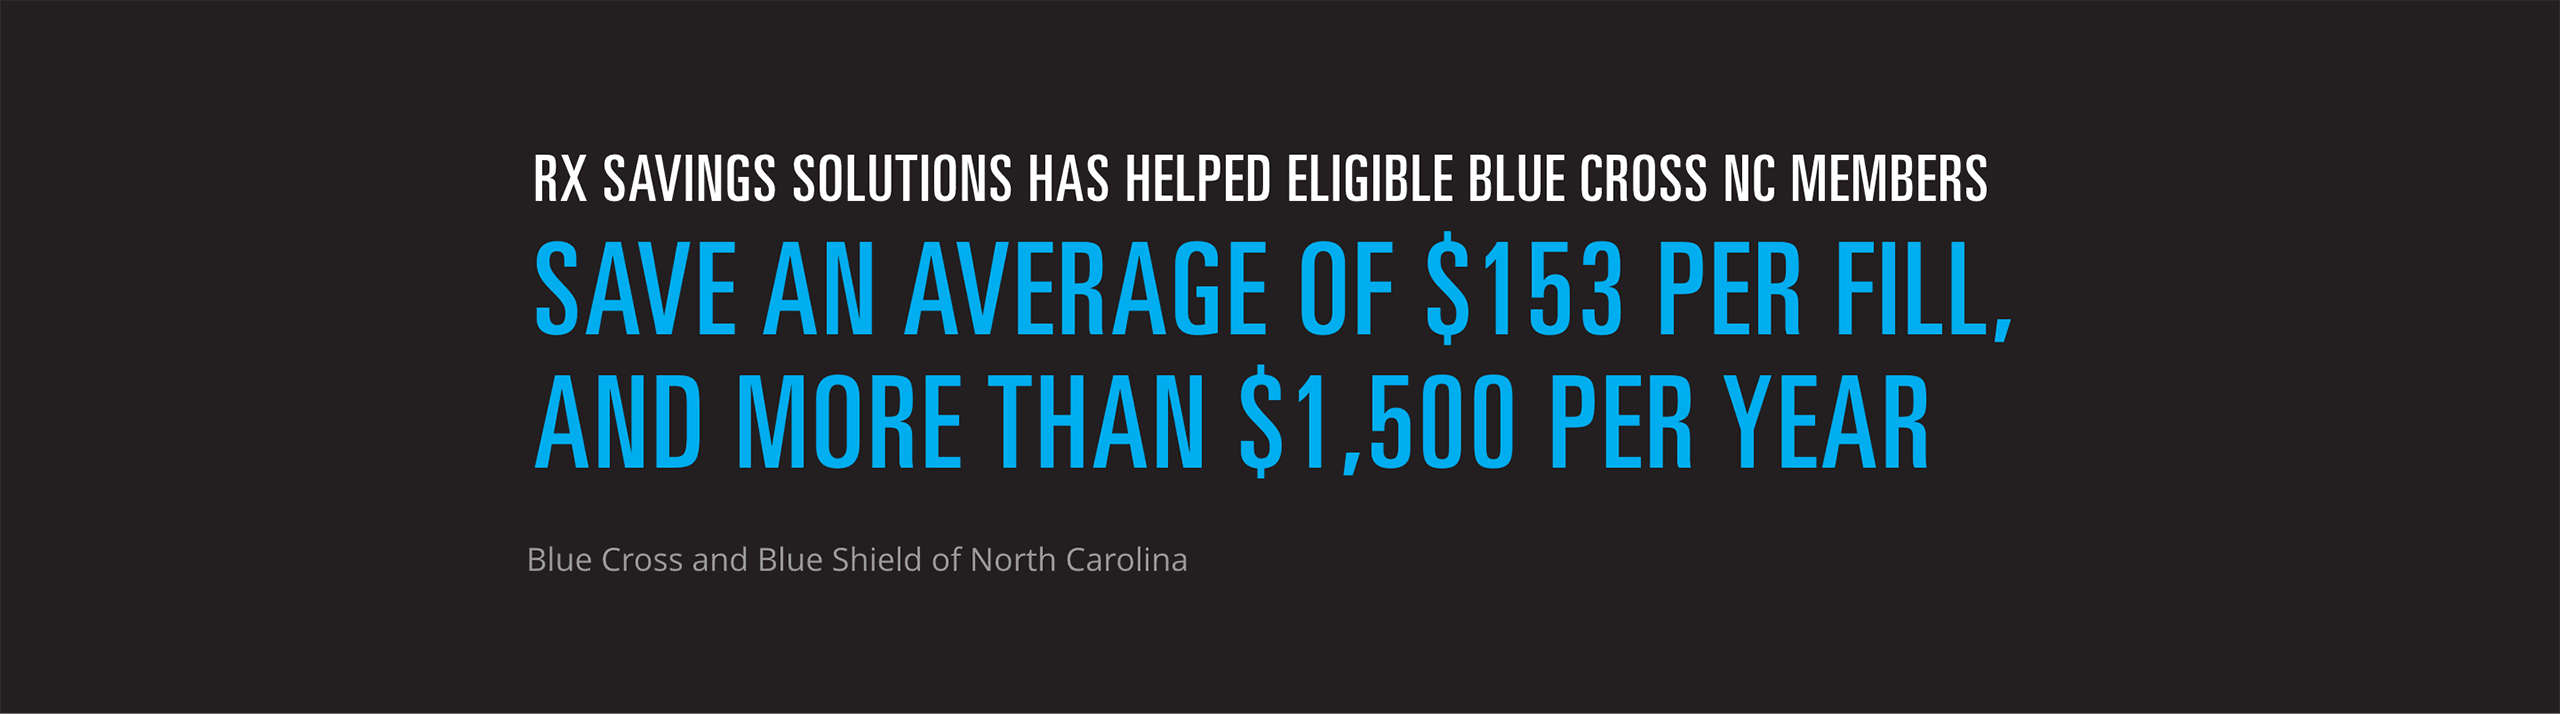 Rx Savings Solutions has helped eligible Blue Cross NC members save an average of $153 per fill, and more than $1,500 per year. (source: Blue Cross and Blue Shield of North Carolina)